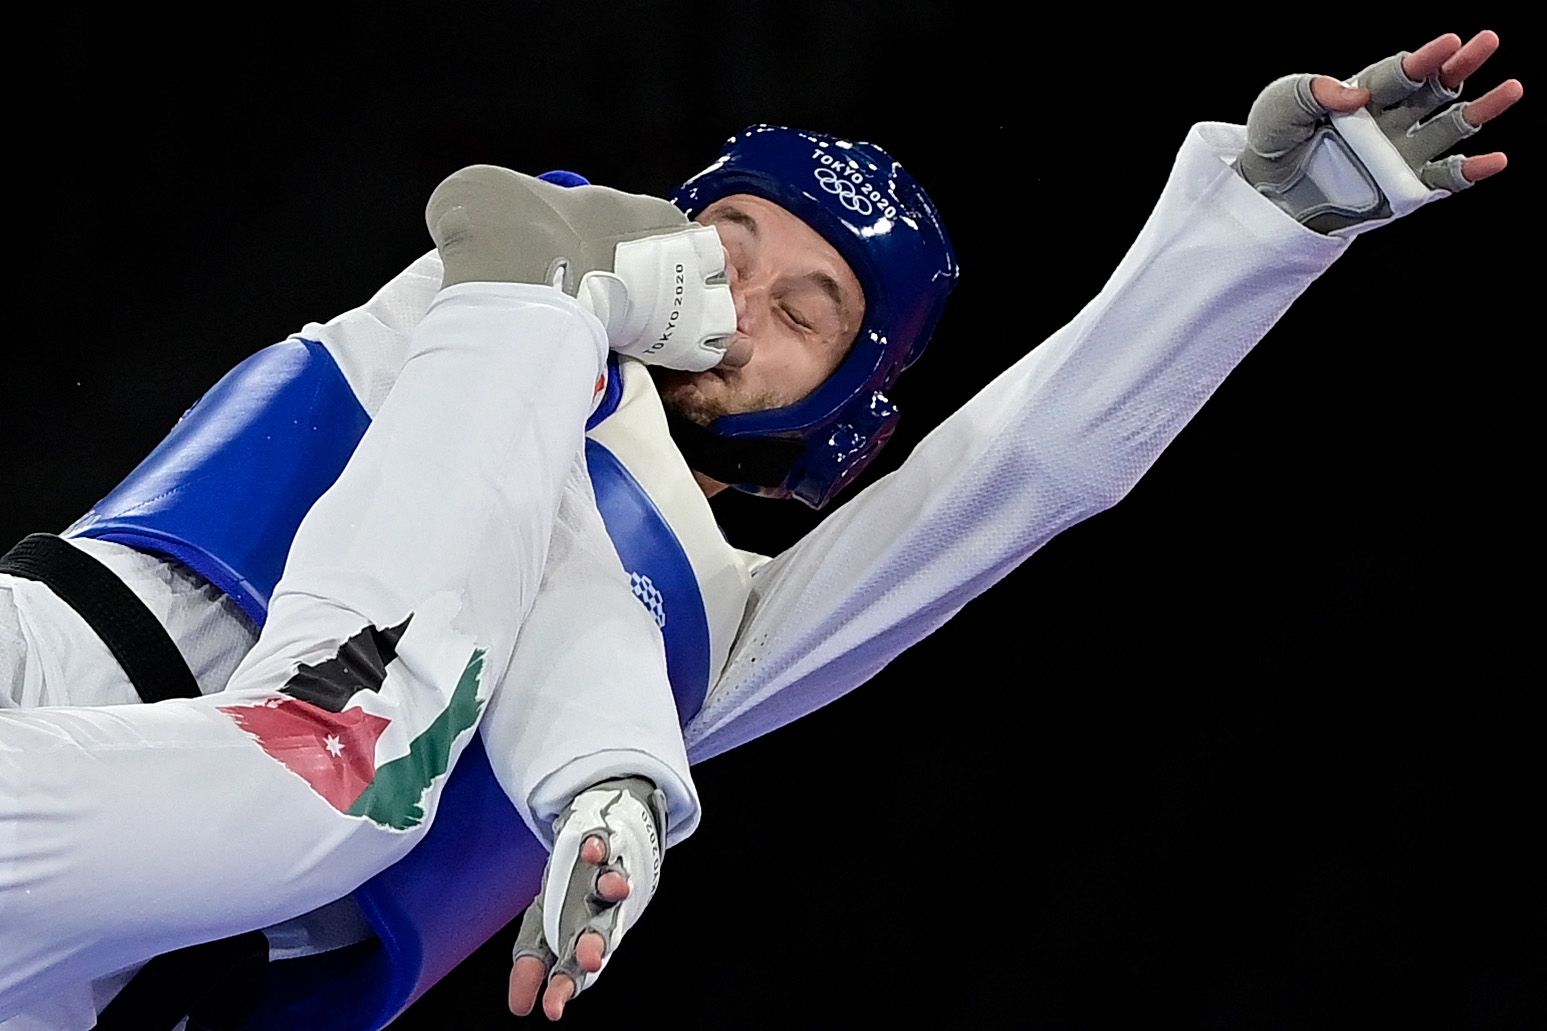 Norway's Richard Andre Ordemann (Blue) and Jordan's Saleh Elsharabaty (Red) compete in the taekwondo men's -80kg elimination round in Tokyo at the Olympics